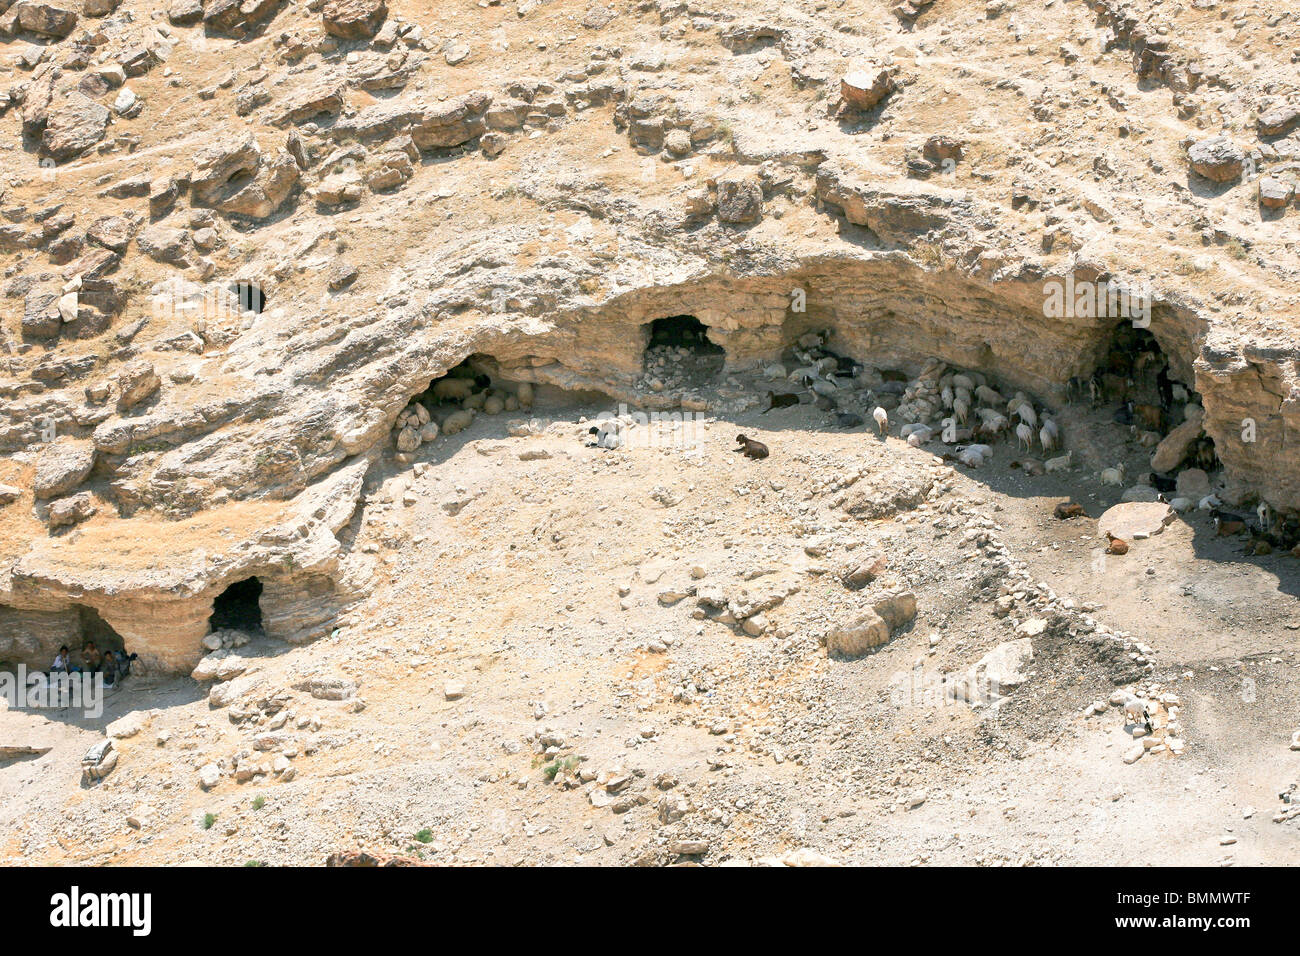 Israel, West Bank, Judaea Desert, A group of shepherds and their sheep rest in the shade of the caves at the Judea desert. Stock Photo